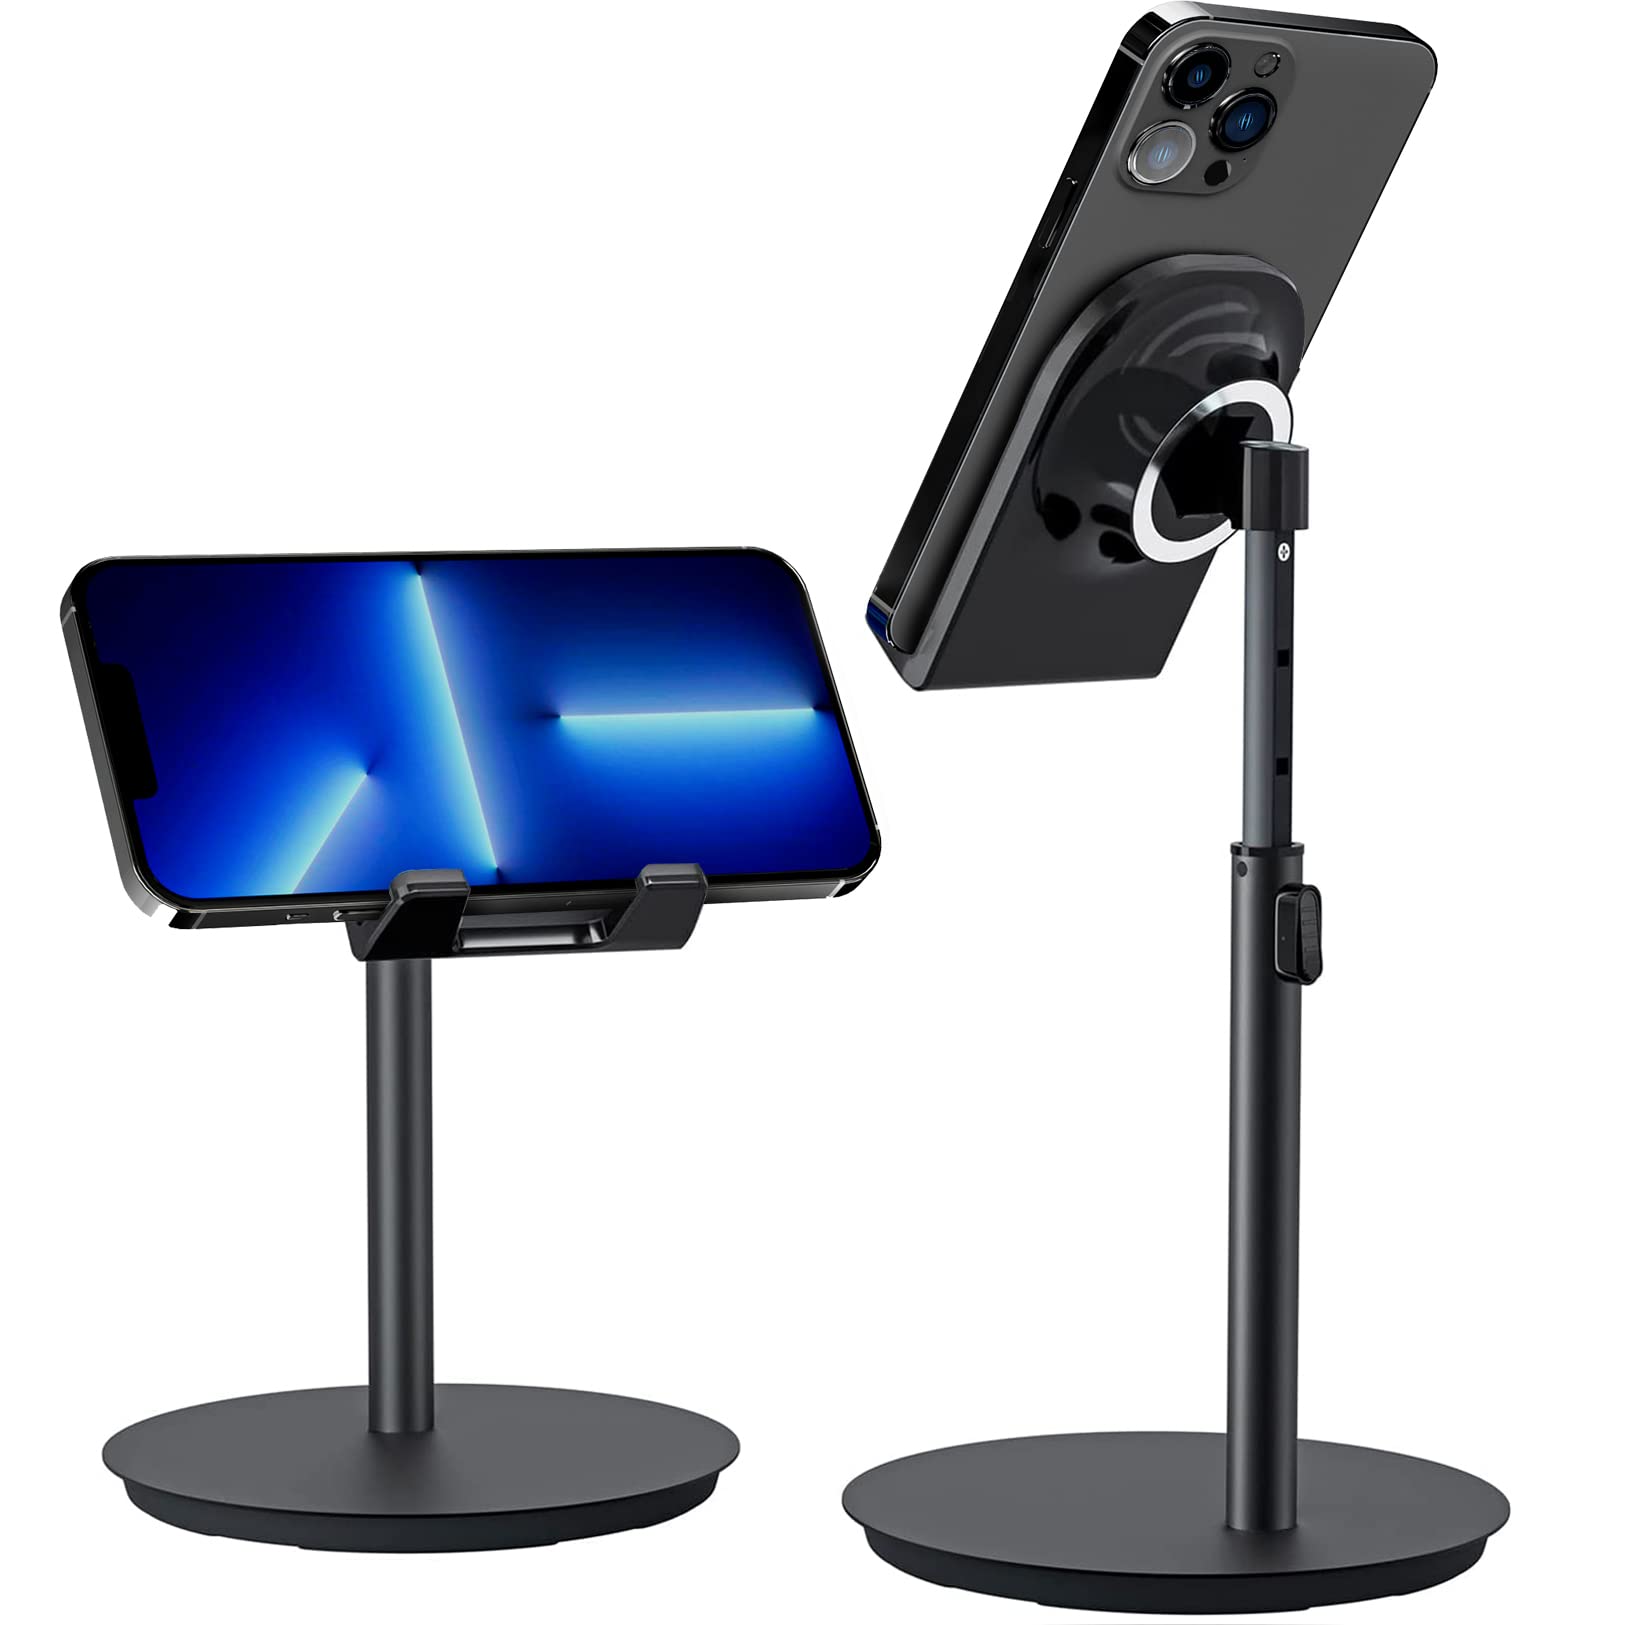 $6.59 KTRIO Adjustable Cell Phone Stand for Desk, Foldable Phone Holder Compatible with iPhone 13 Pro Max 11 12 XR 8 7 SE, Pad, Tablet, Smartphone - Black - $6.59 at Amazon